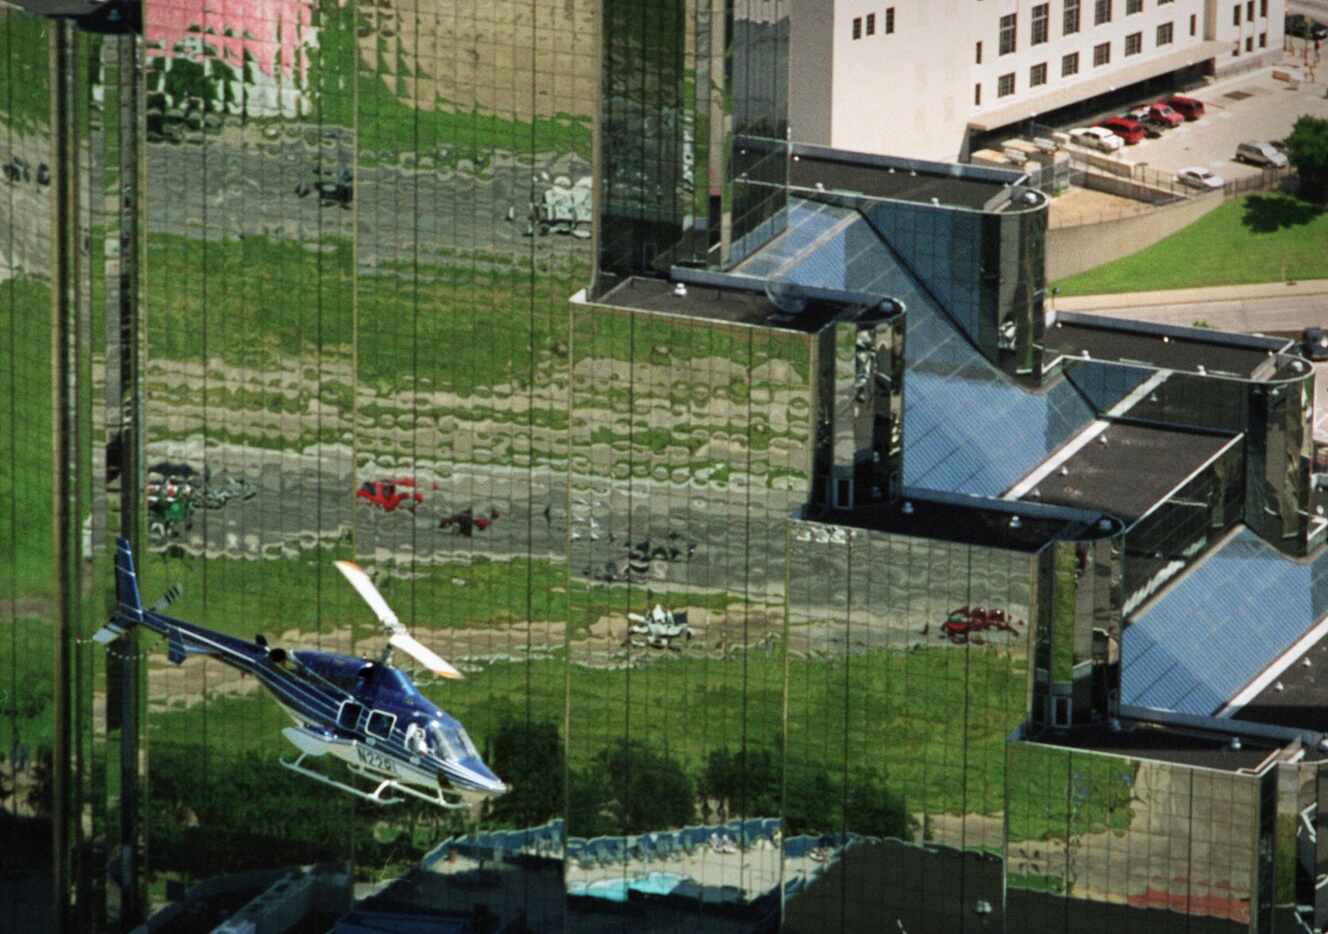 Boeing officials took a helicopter tour of Dallas in 2001, passing by the Hyatt Regency...